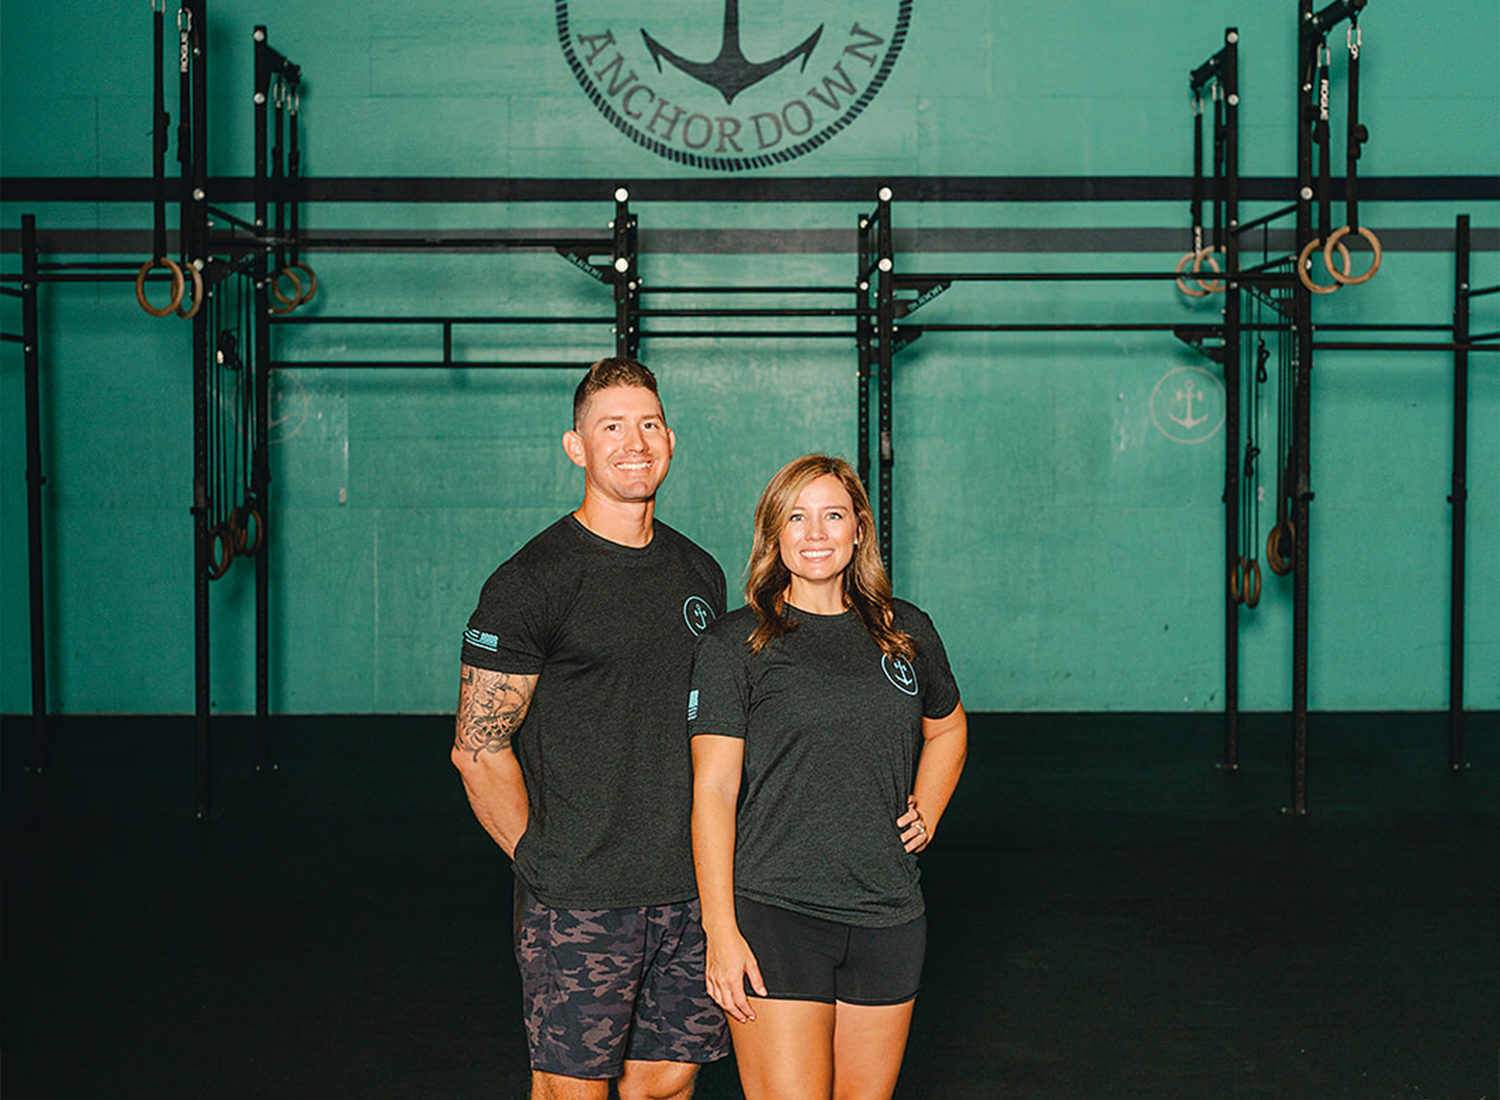 About Crossfit Anchor Down